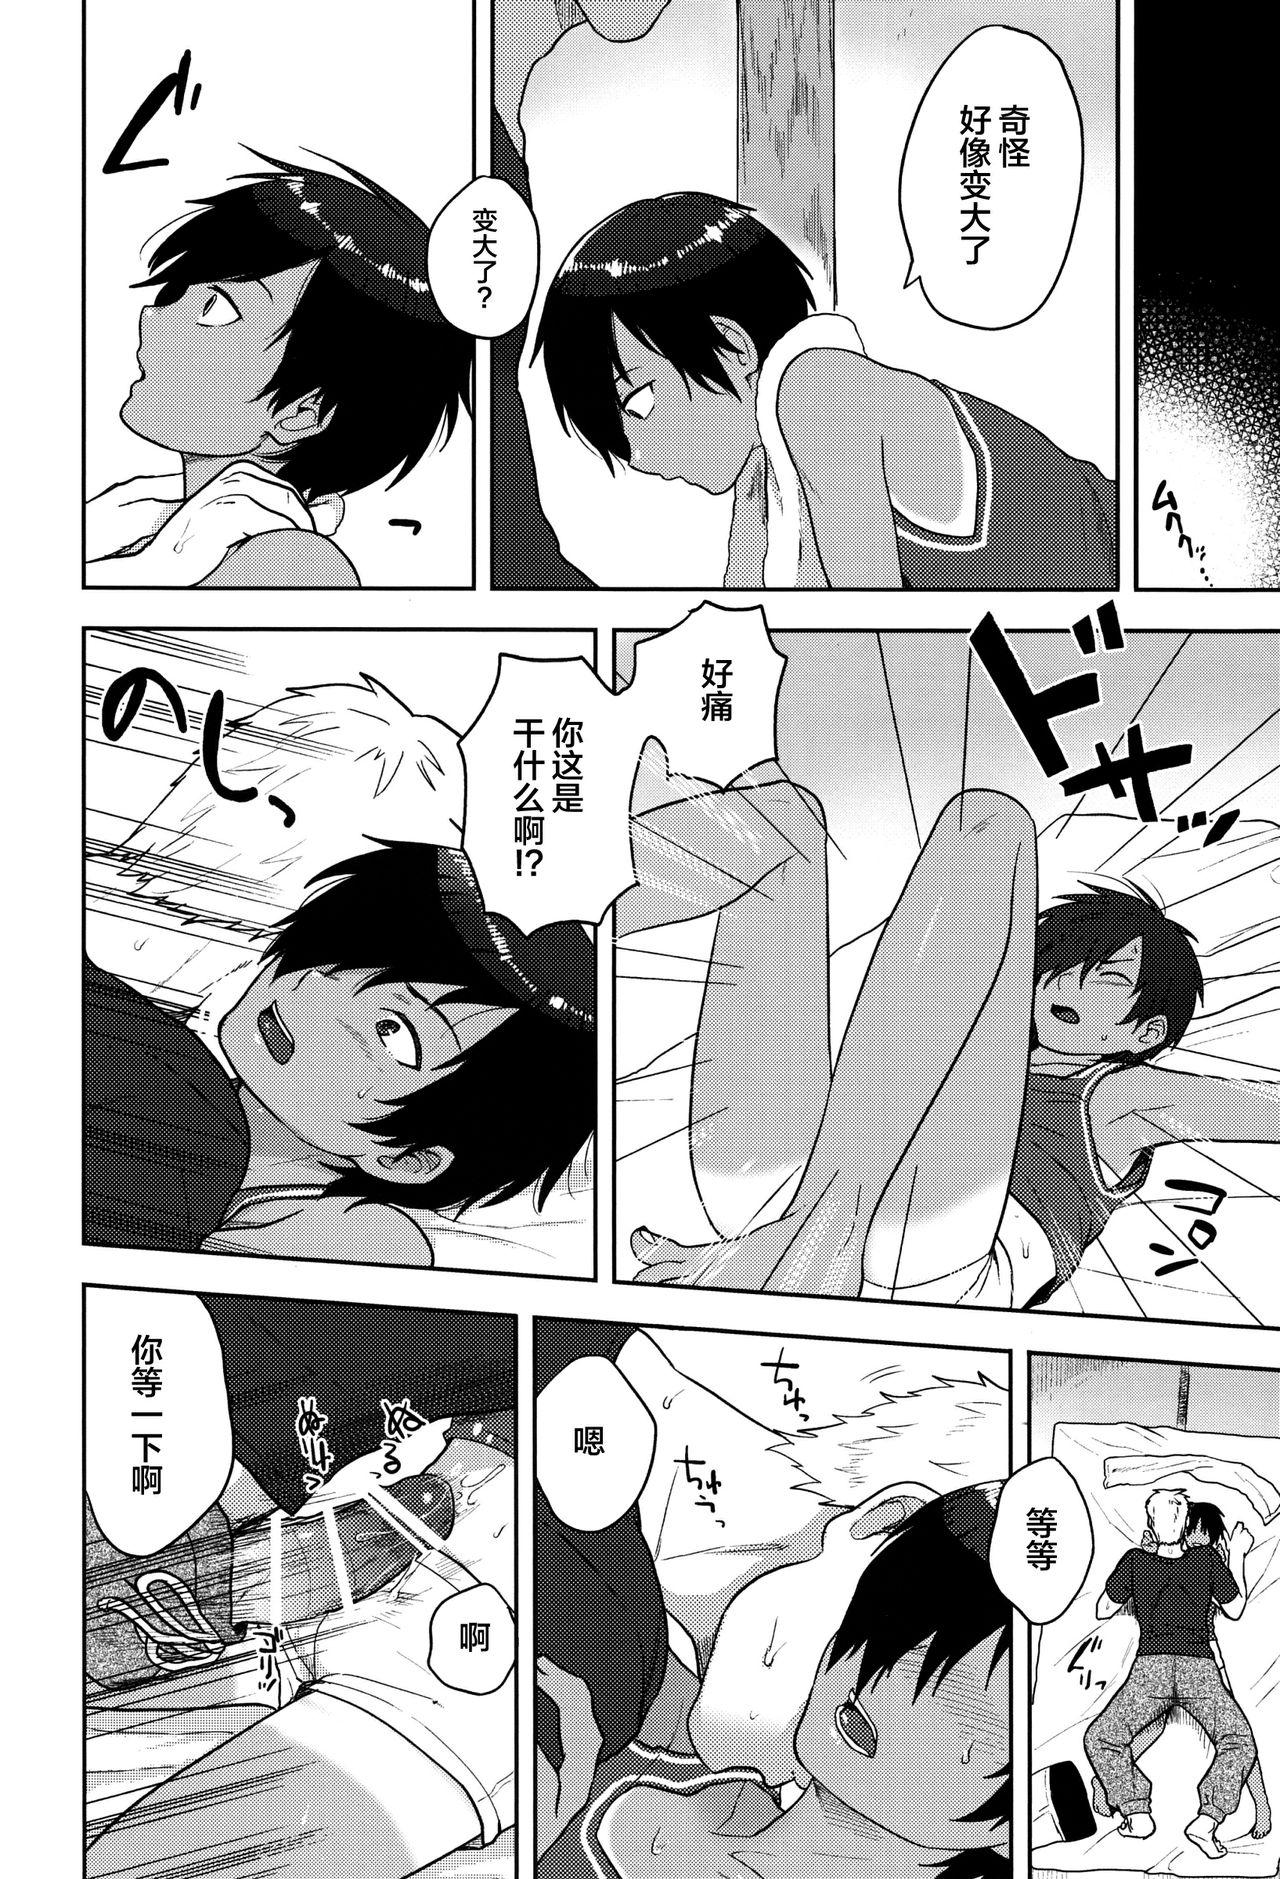 Ejaculation DKY - Summer wars Orgasms - Page 9